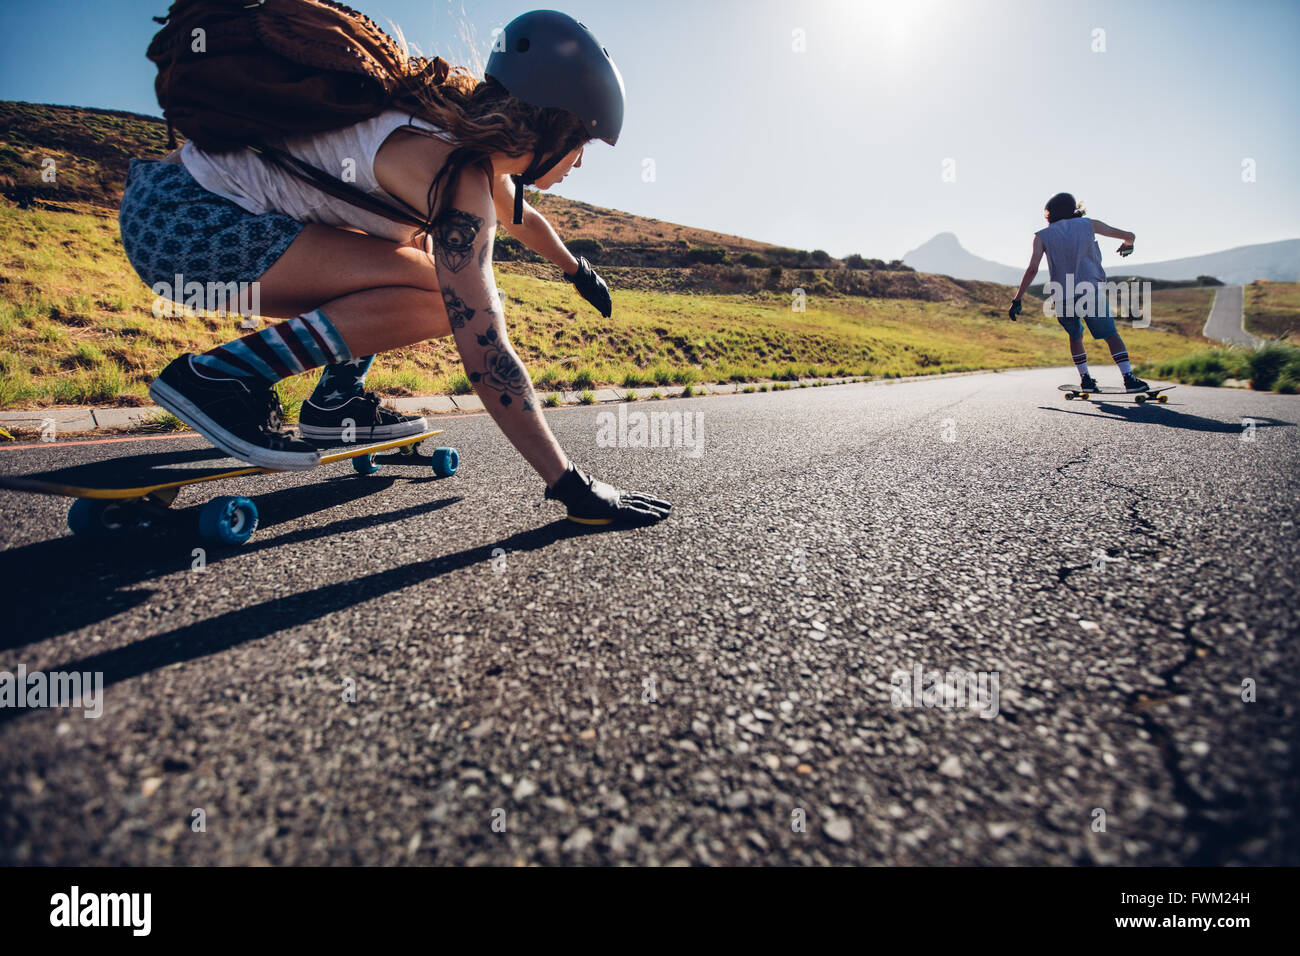 Young woman skating with her friend in background. Young people longboarding on rural road on summer day. Stock Photo